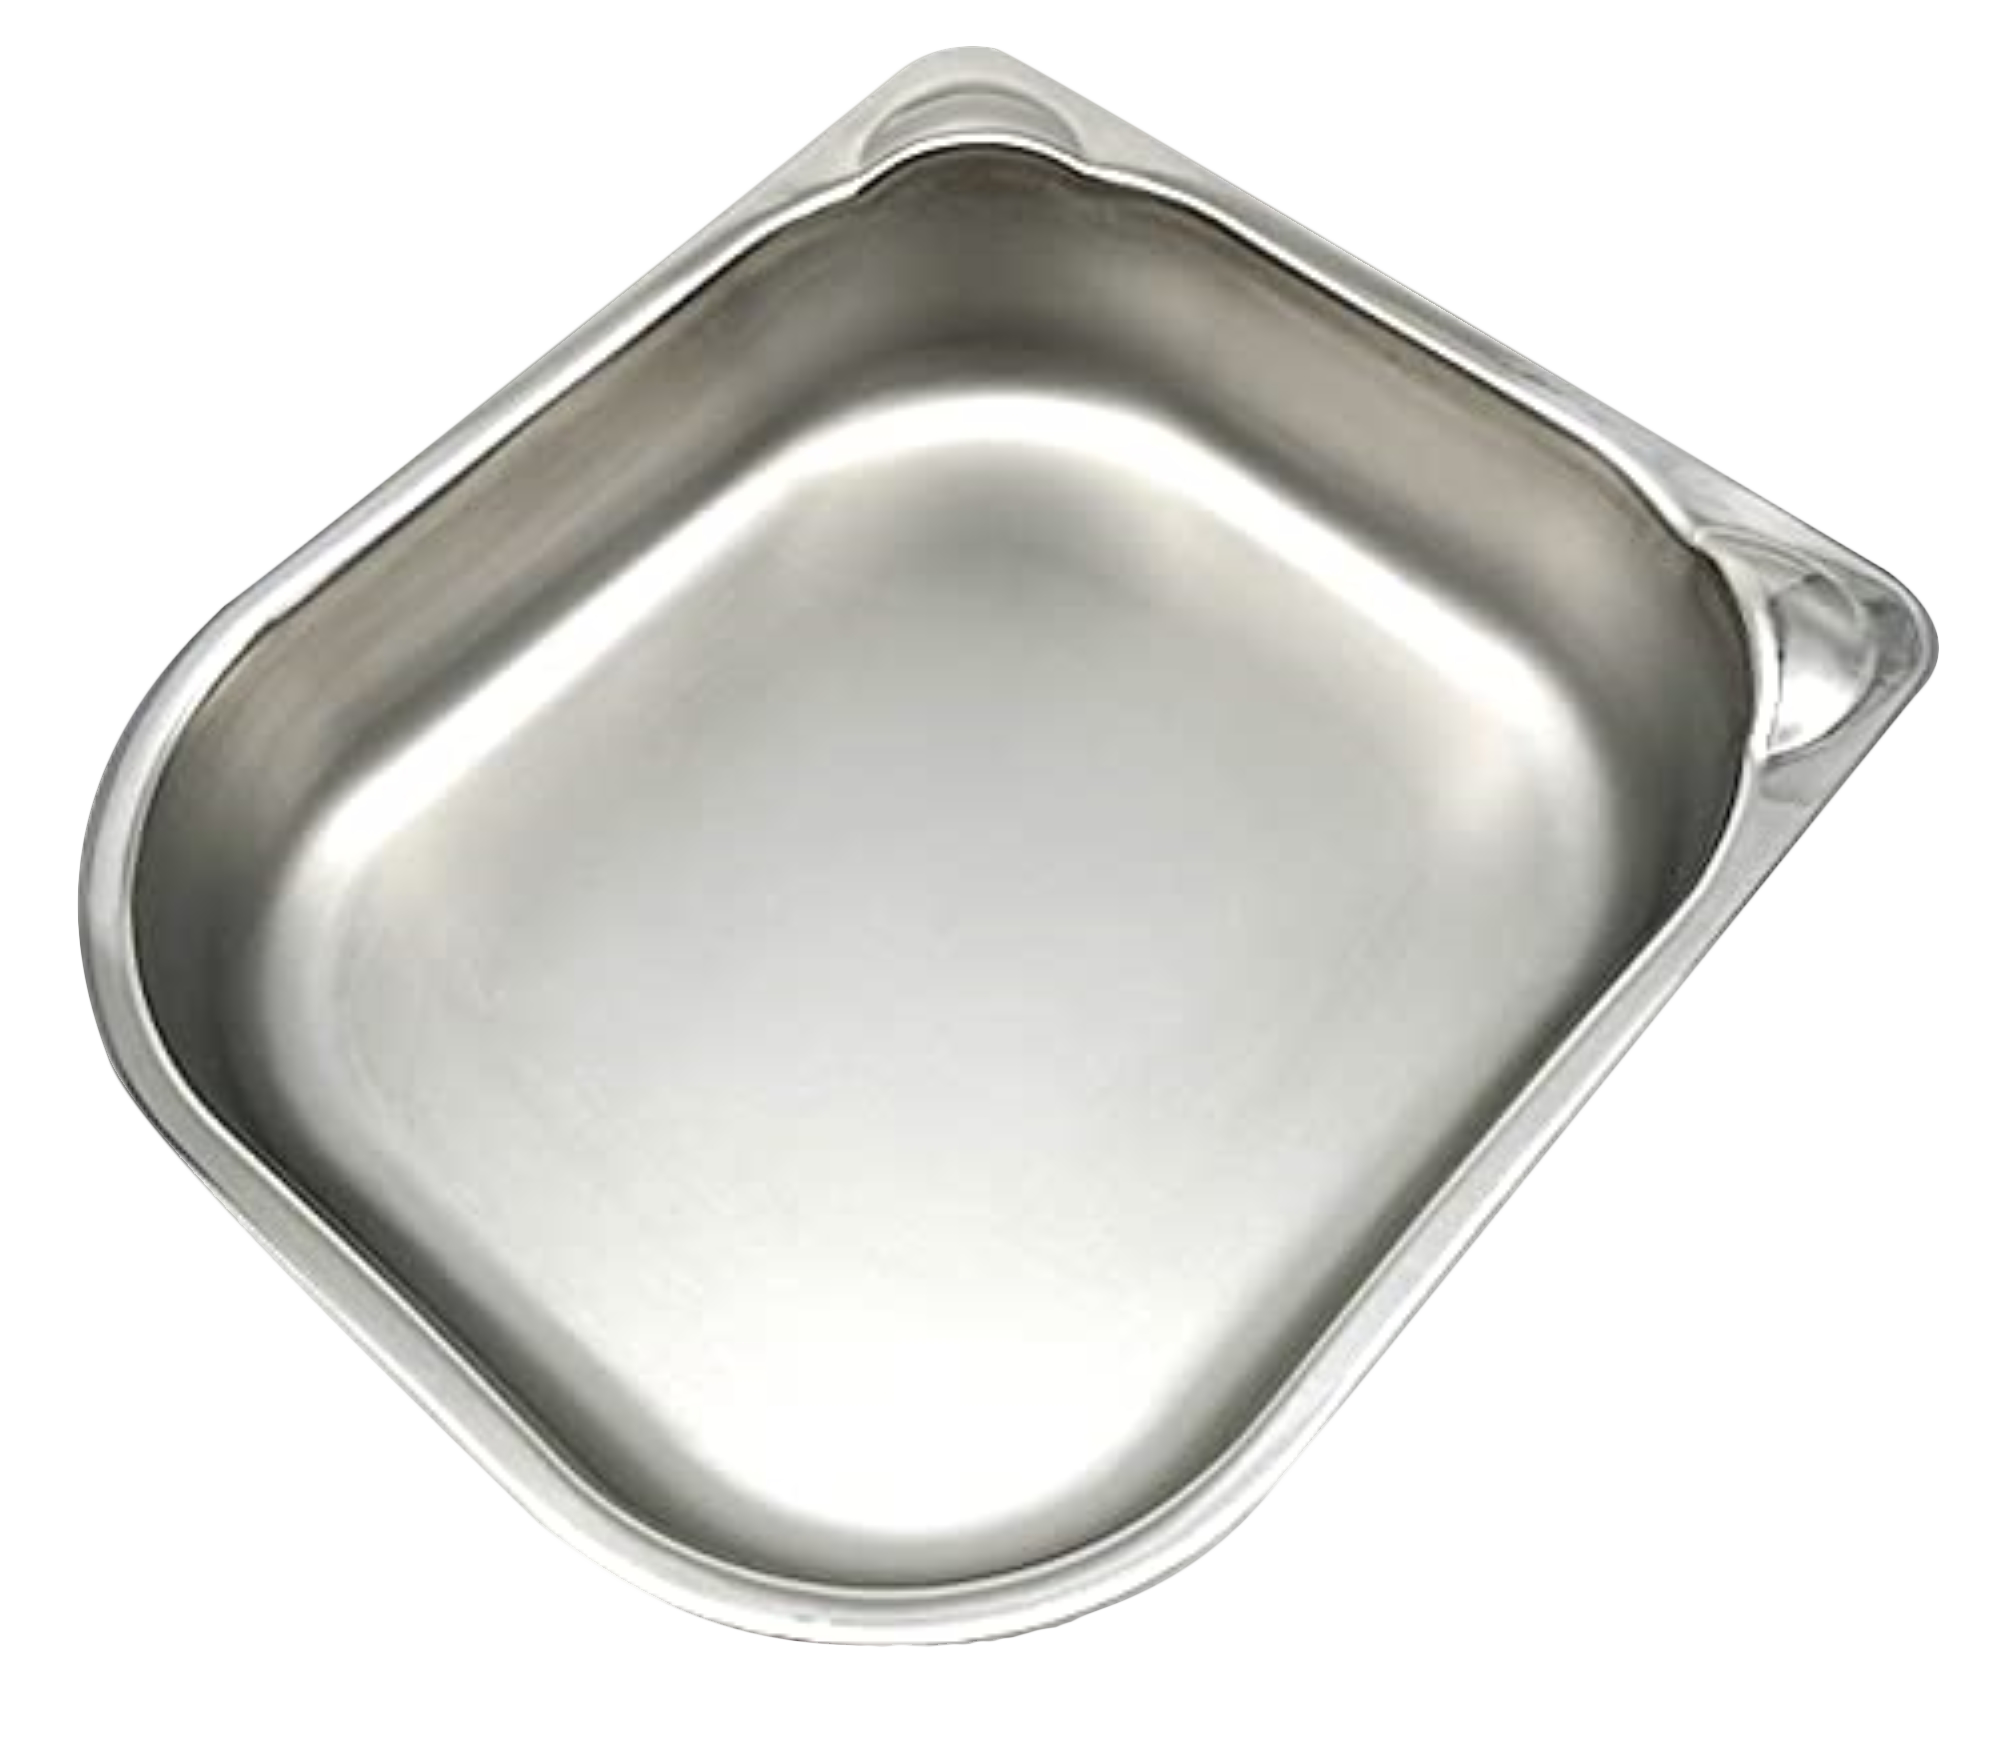 Cat Mate / Closer Pets - Stainless Steel Bowl Inserts x 2 for One- and Two-meal Automatic Pet Feeders (402)